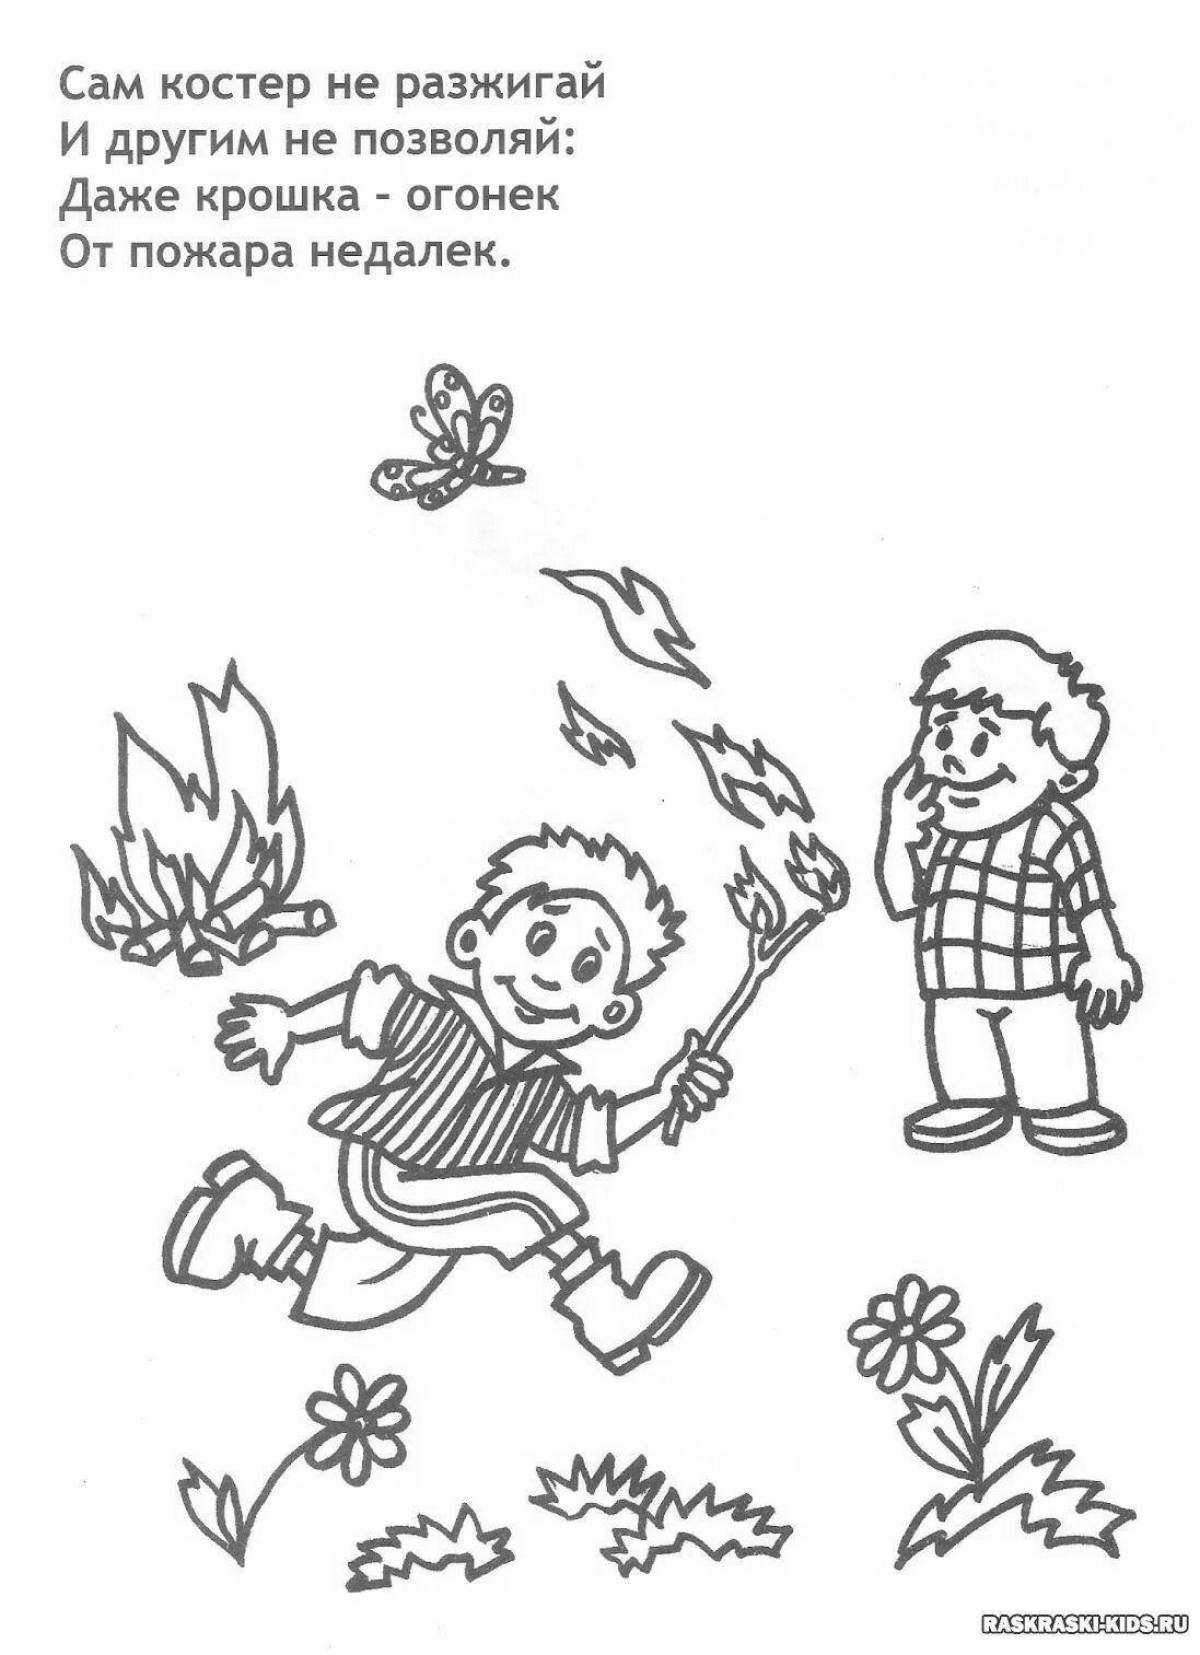 Coloring book for children rules of conduct in the forest